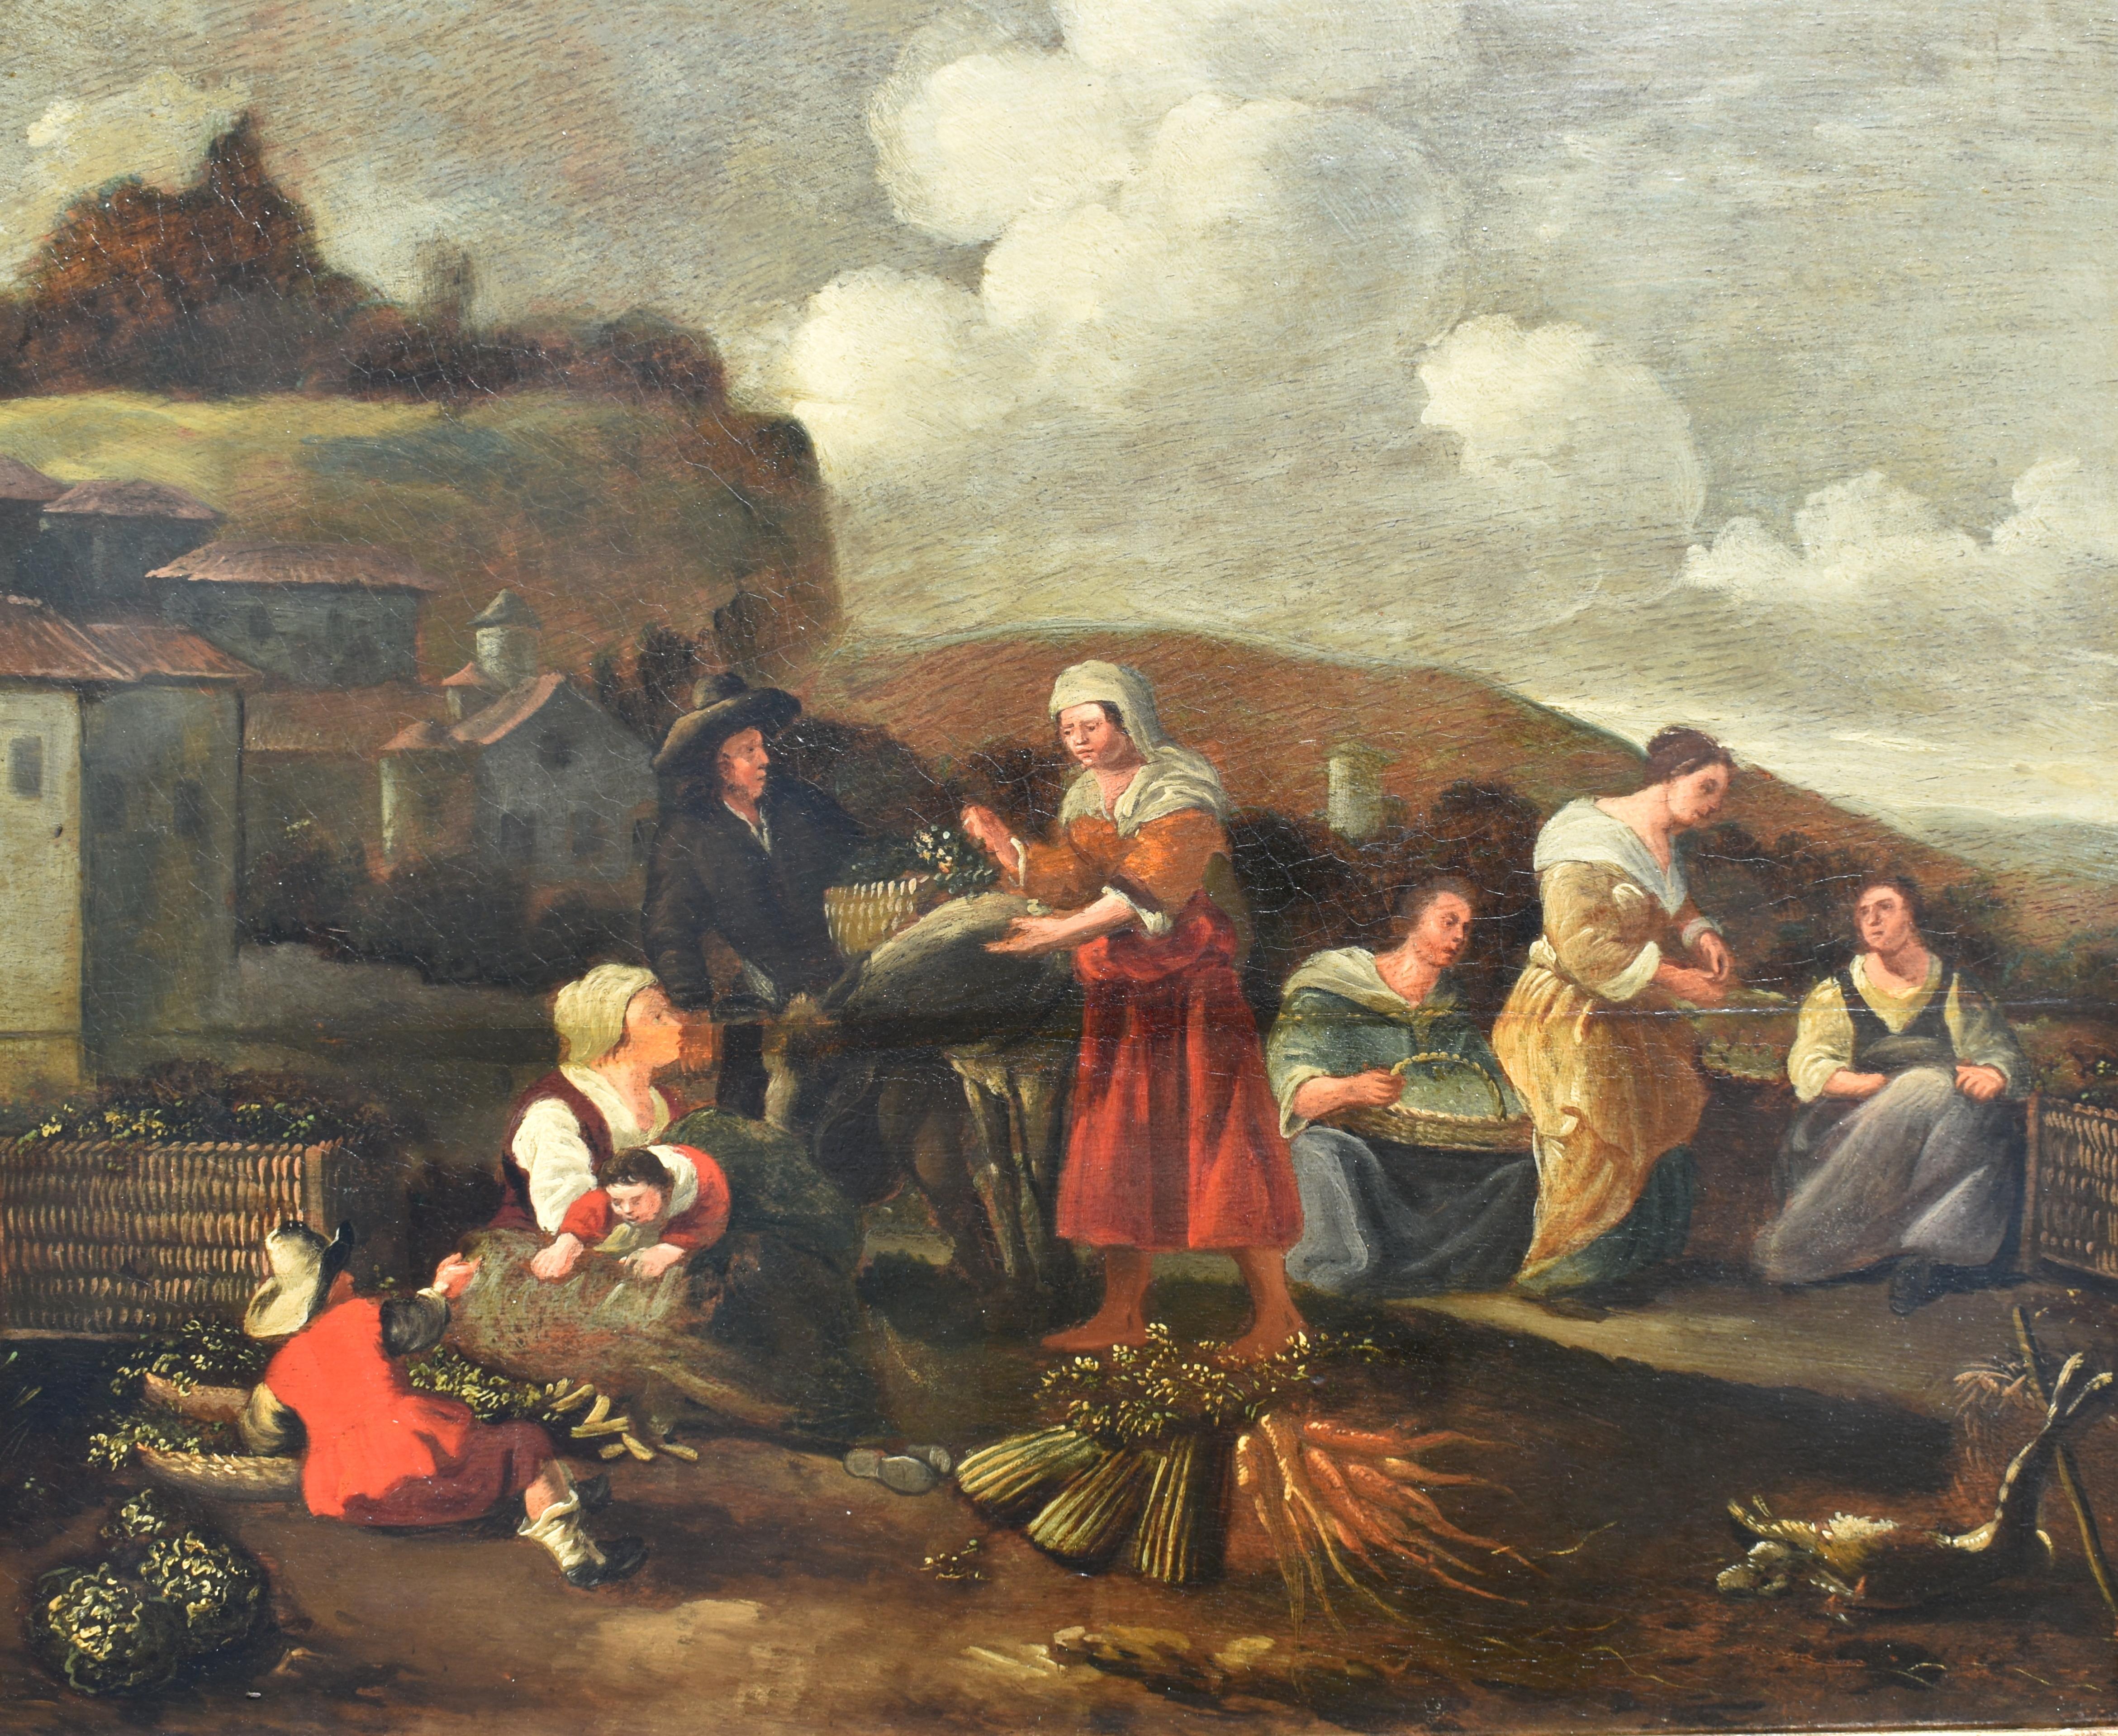 After Hendrick MOMMERS (1623-1693) Haarlem Vegetable Market c1750 - Painting by Hendrick Mommers